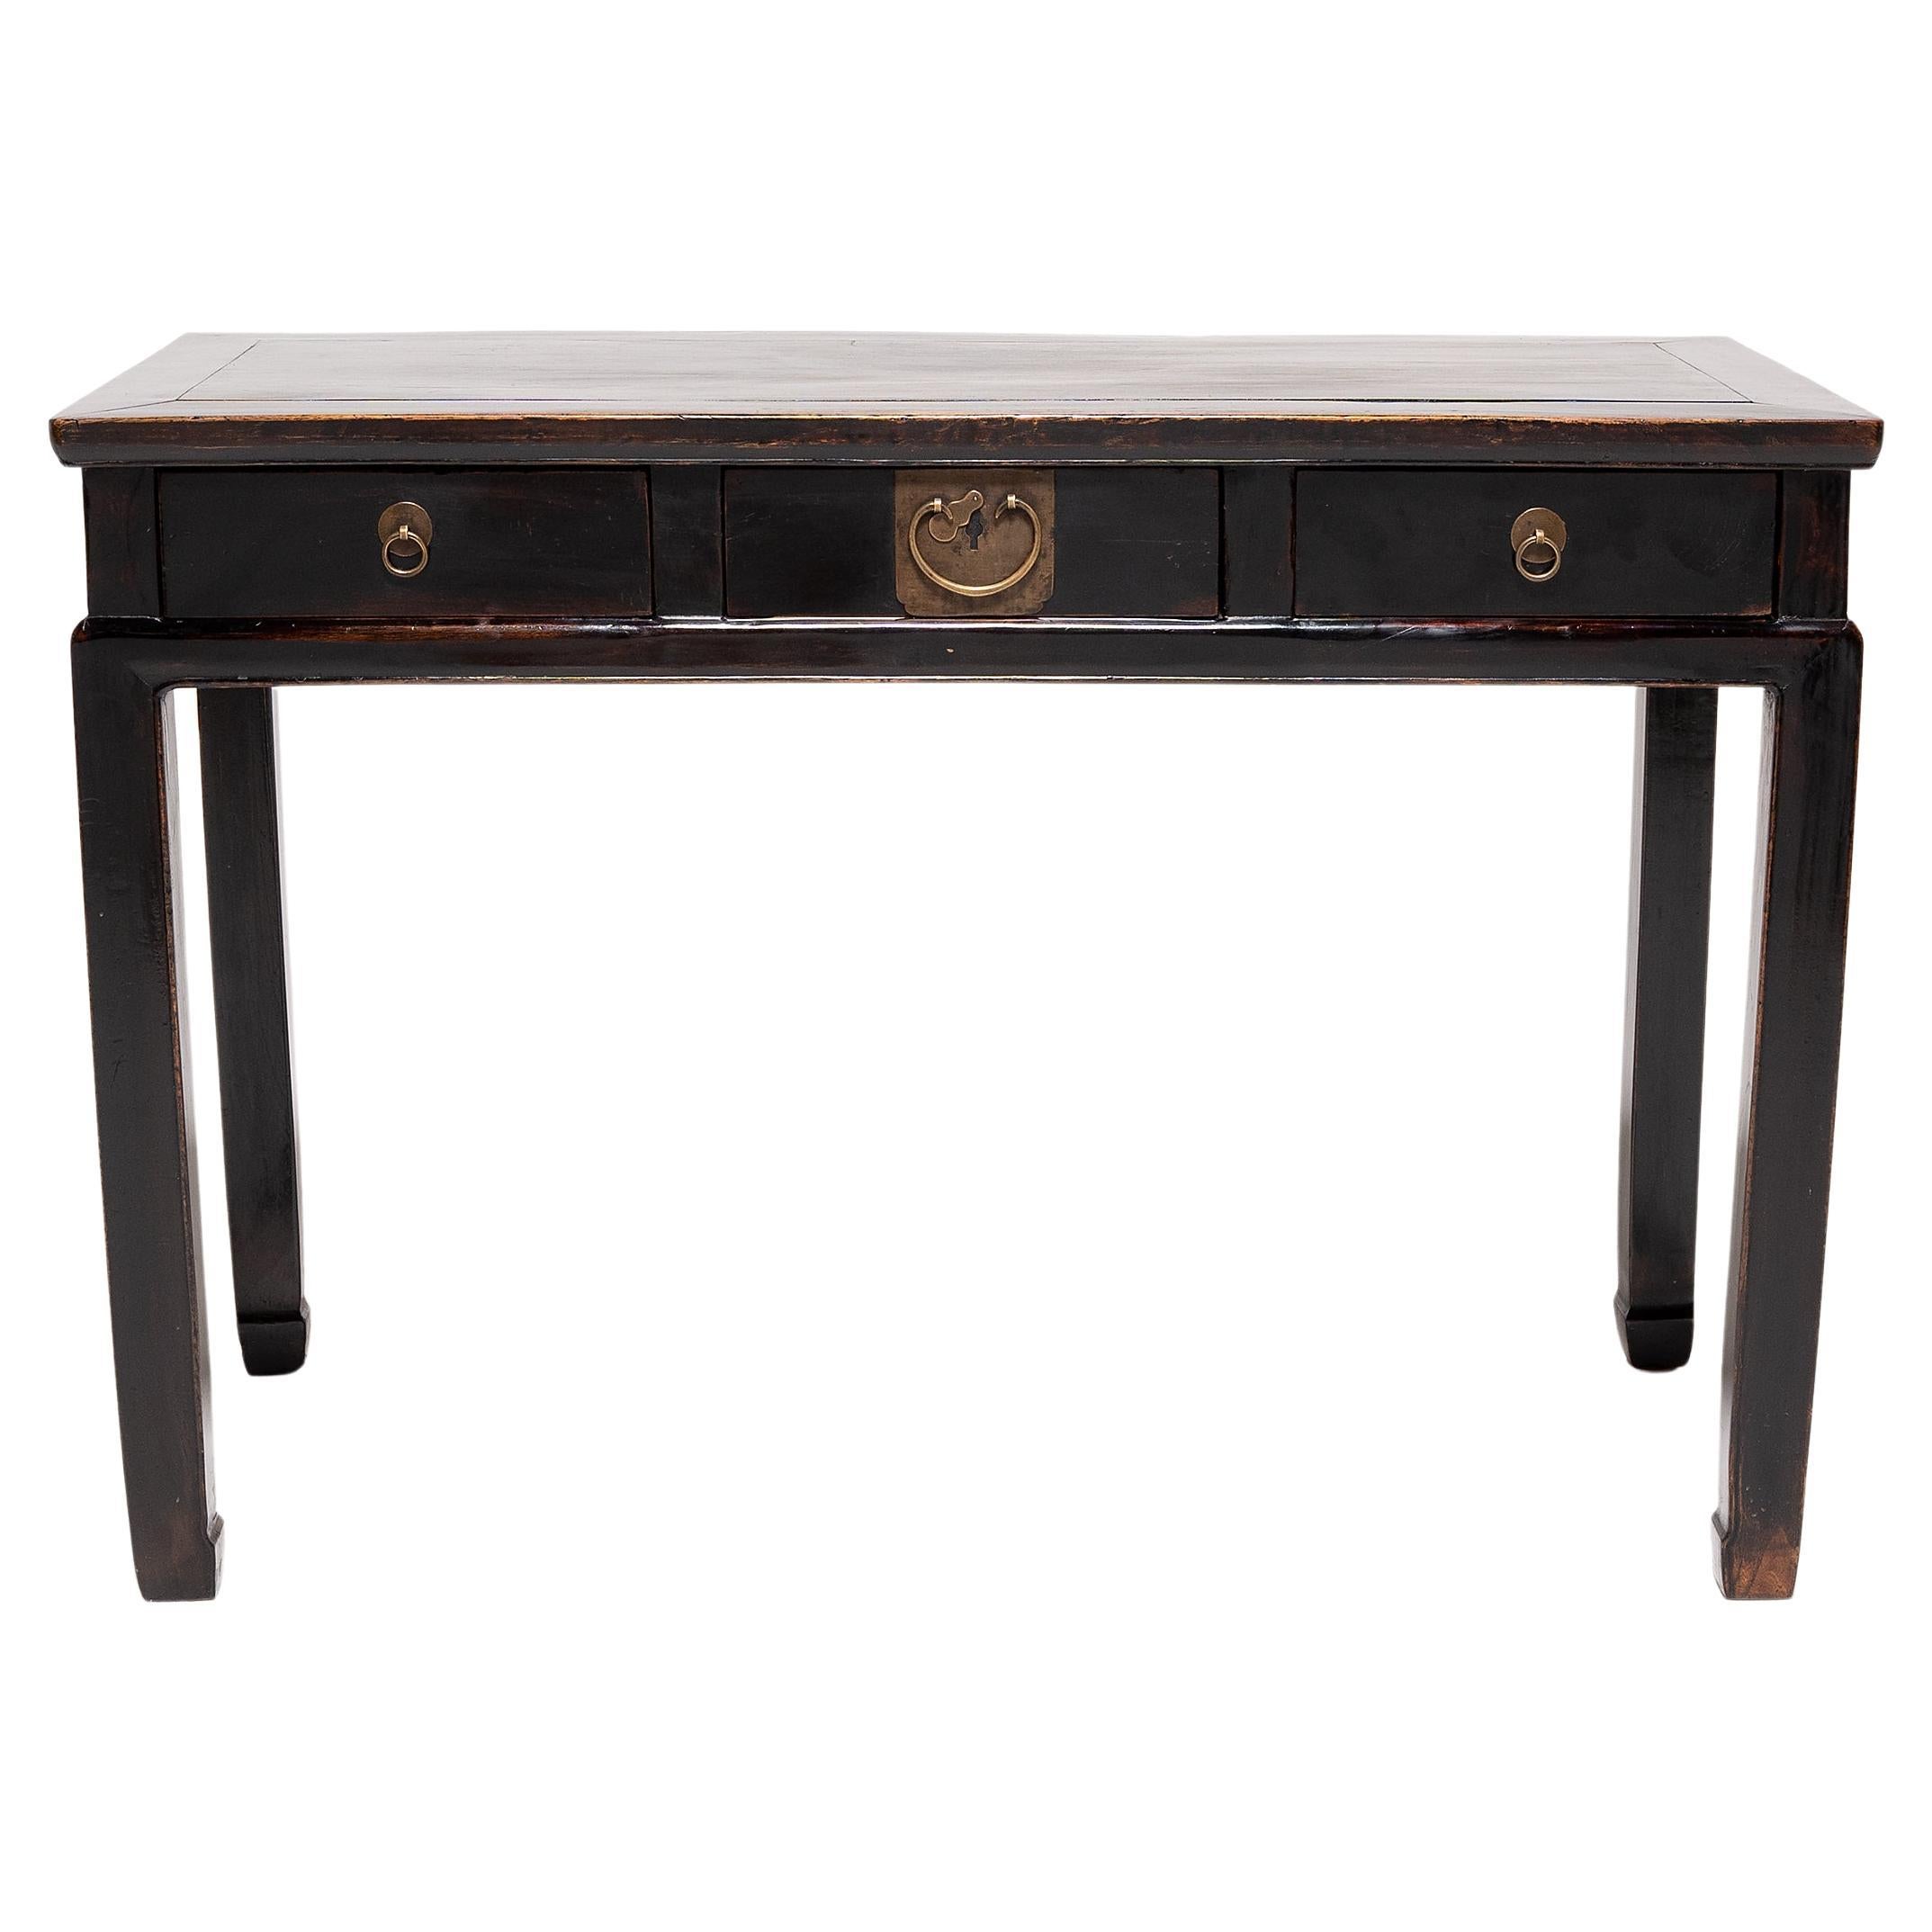 Chinese Black Lacquer Writing Desk, C. 1850